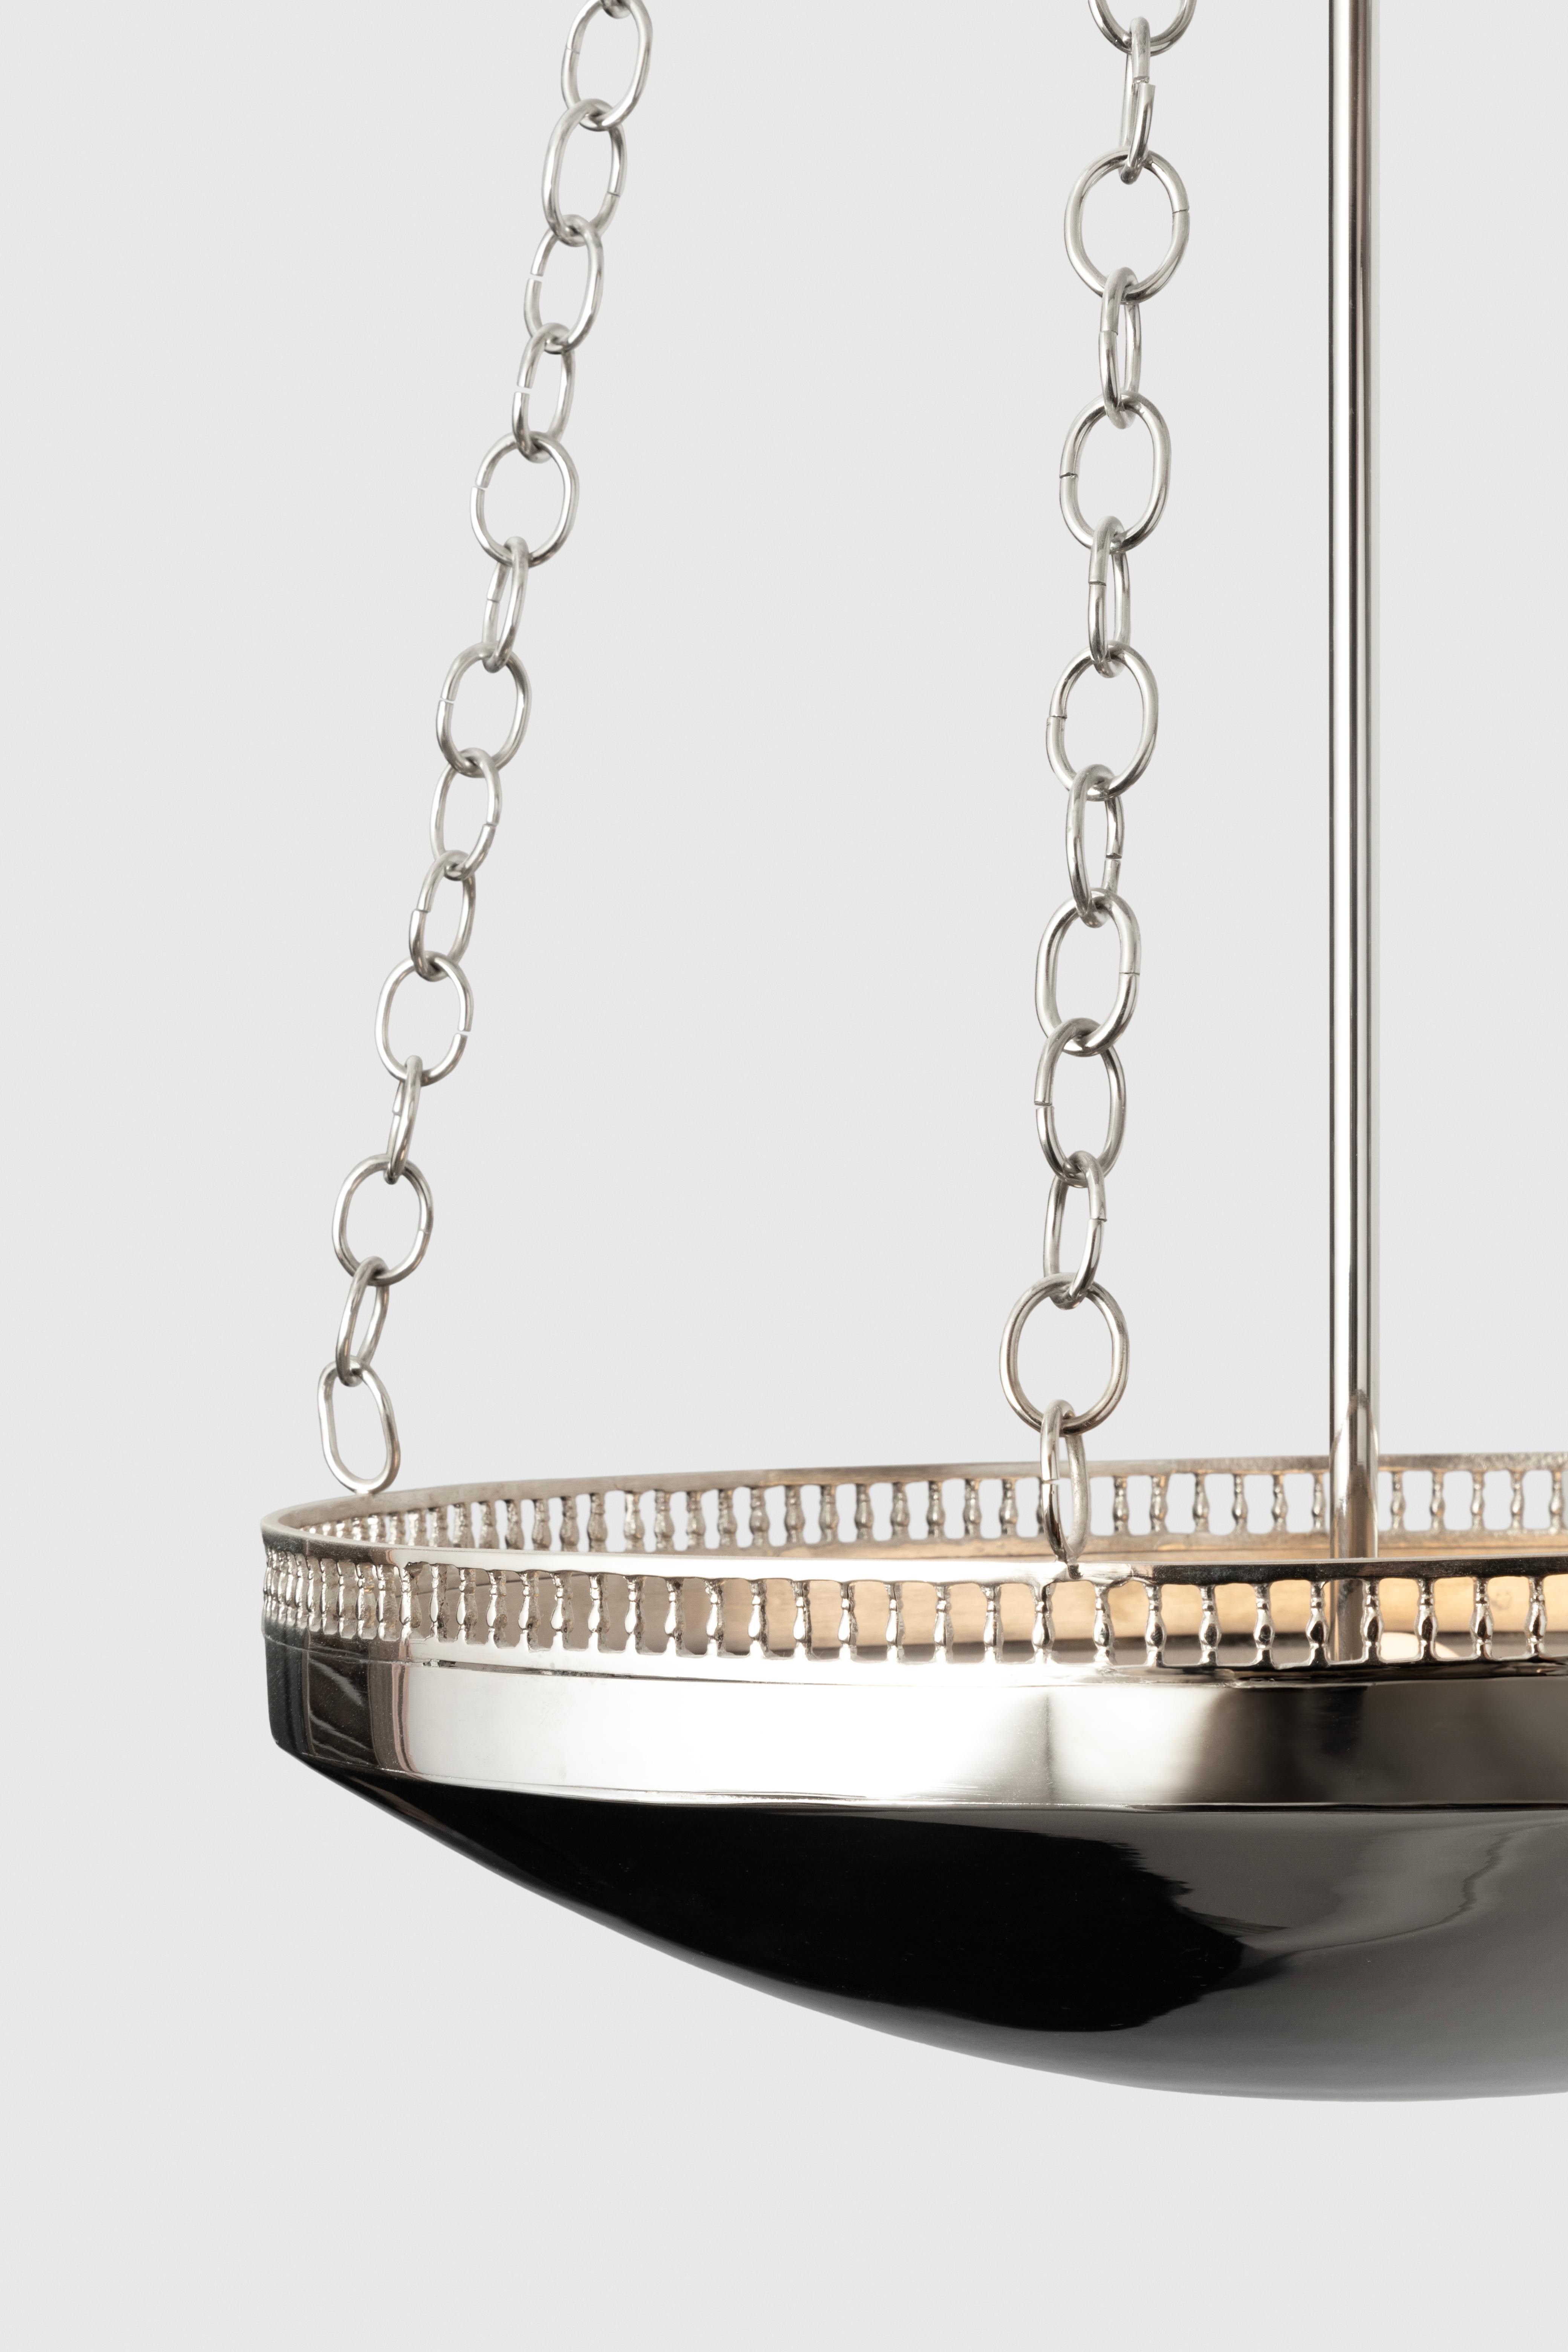 The Fernanda Dish Lamp is a refined and elegant pendant dish light, suspended from four chains from a crown canopy. 

It was designed by Fernanda Loyzaga and launched at the end of 2023. Its elegant lines and balustrade make it the best option for a